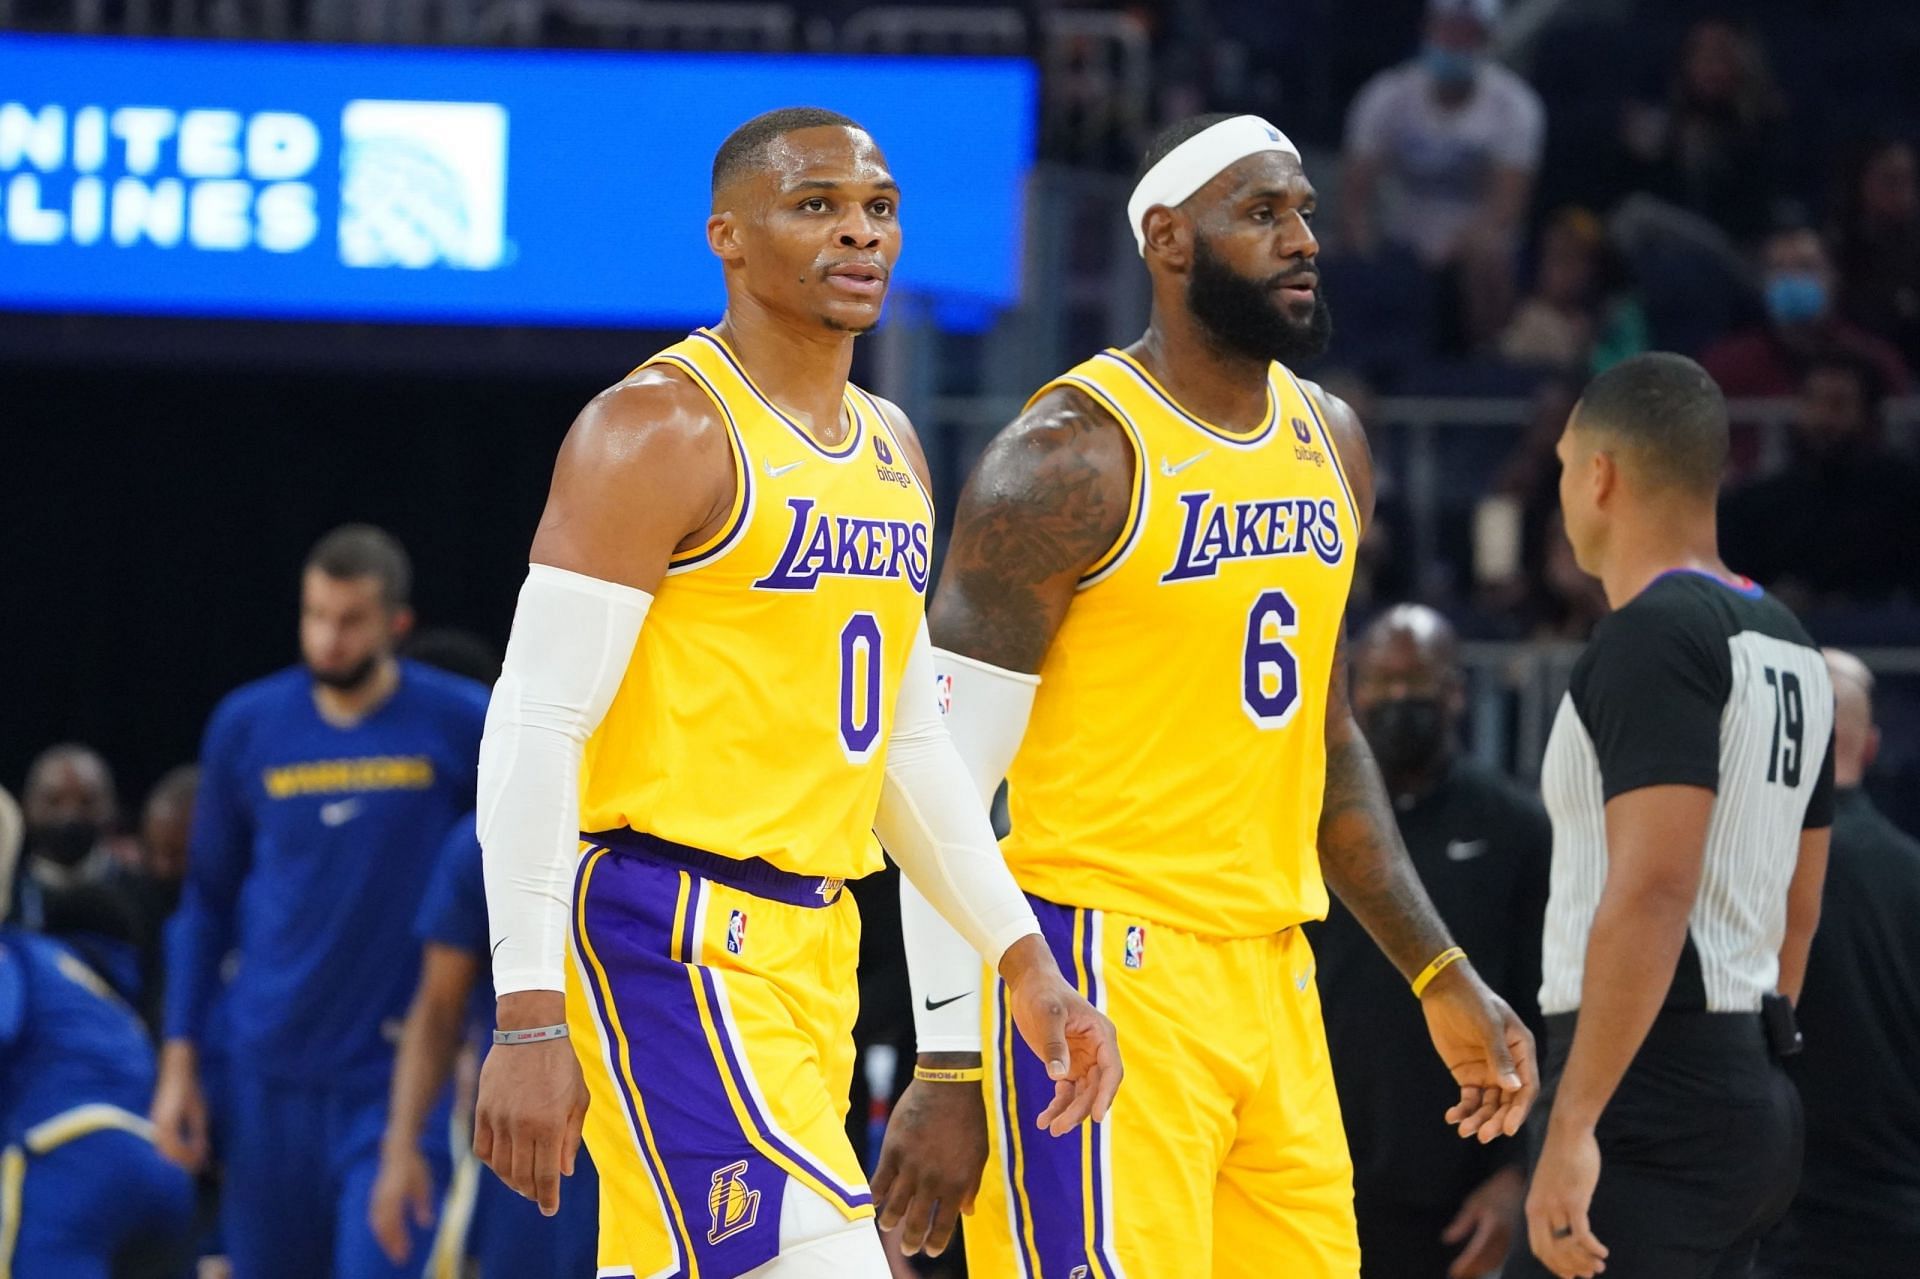 Russell Westbrook, LeBron James and the LA Lakers just played their best game of the season against the Boston Celtics. [Photo: Lake Show Life]